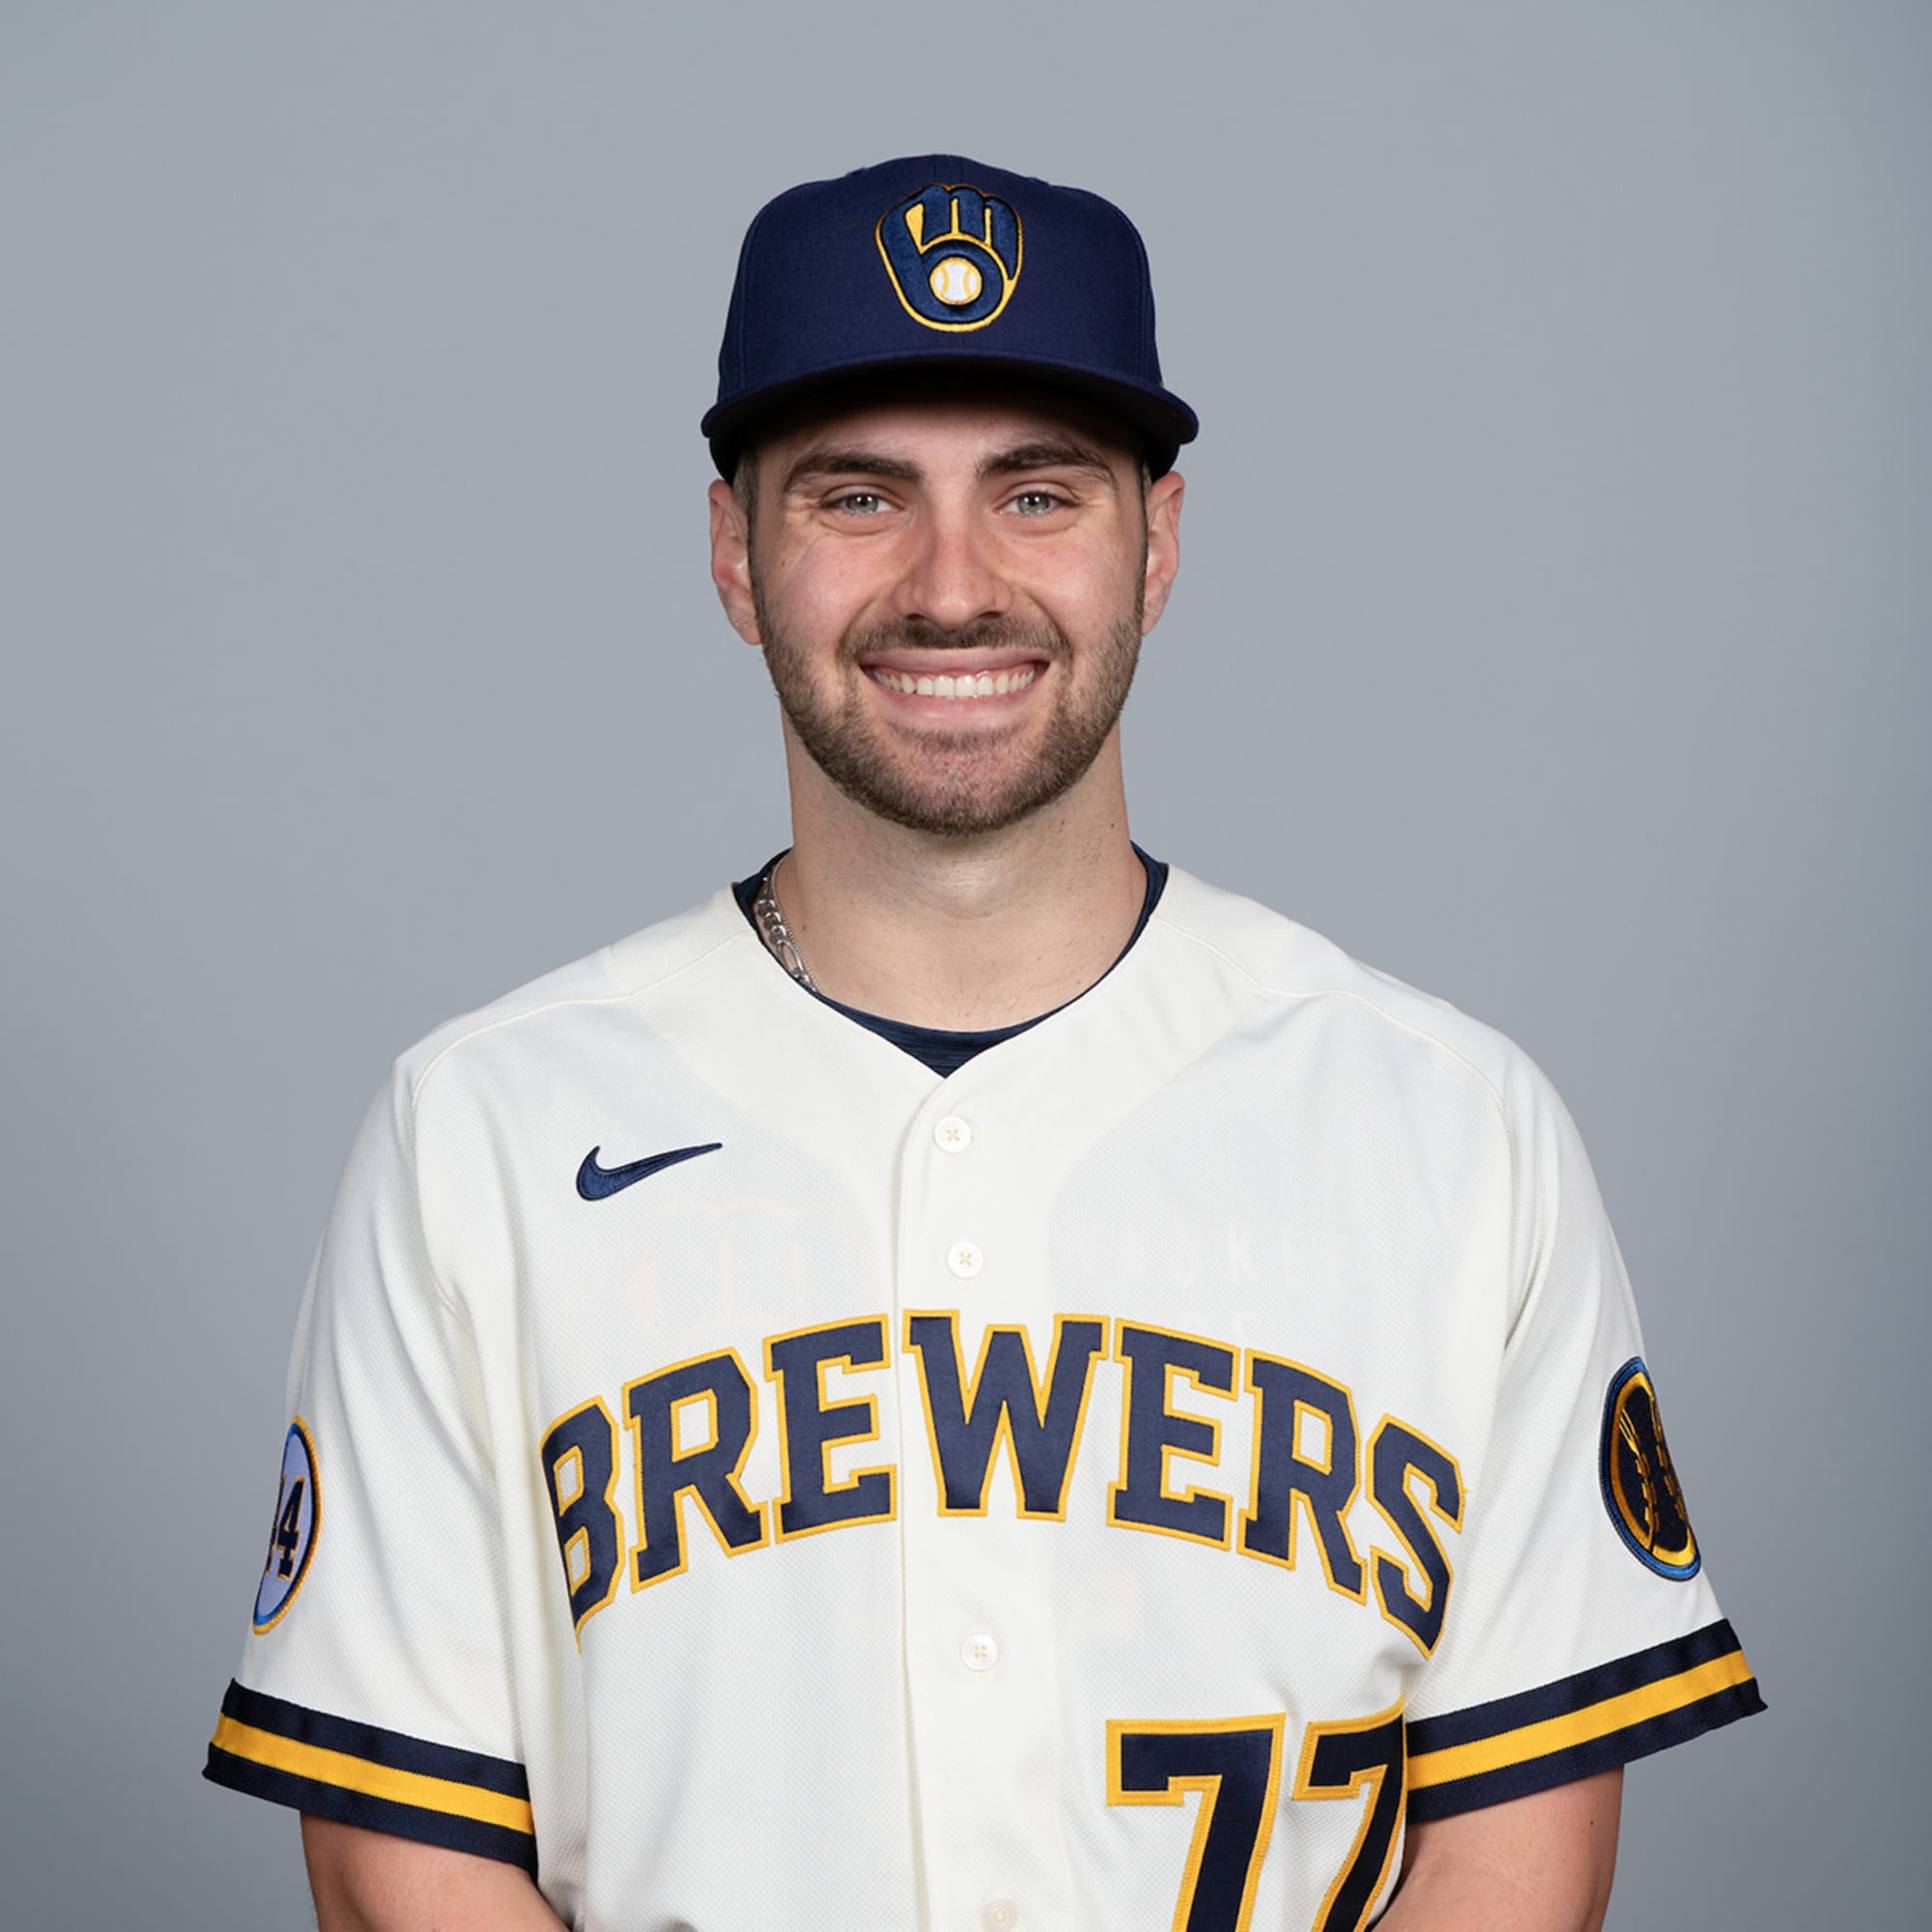 Milwaukee Brewers Top Prospect Garrett Mitchell Promoted to Double-A